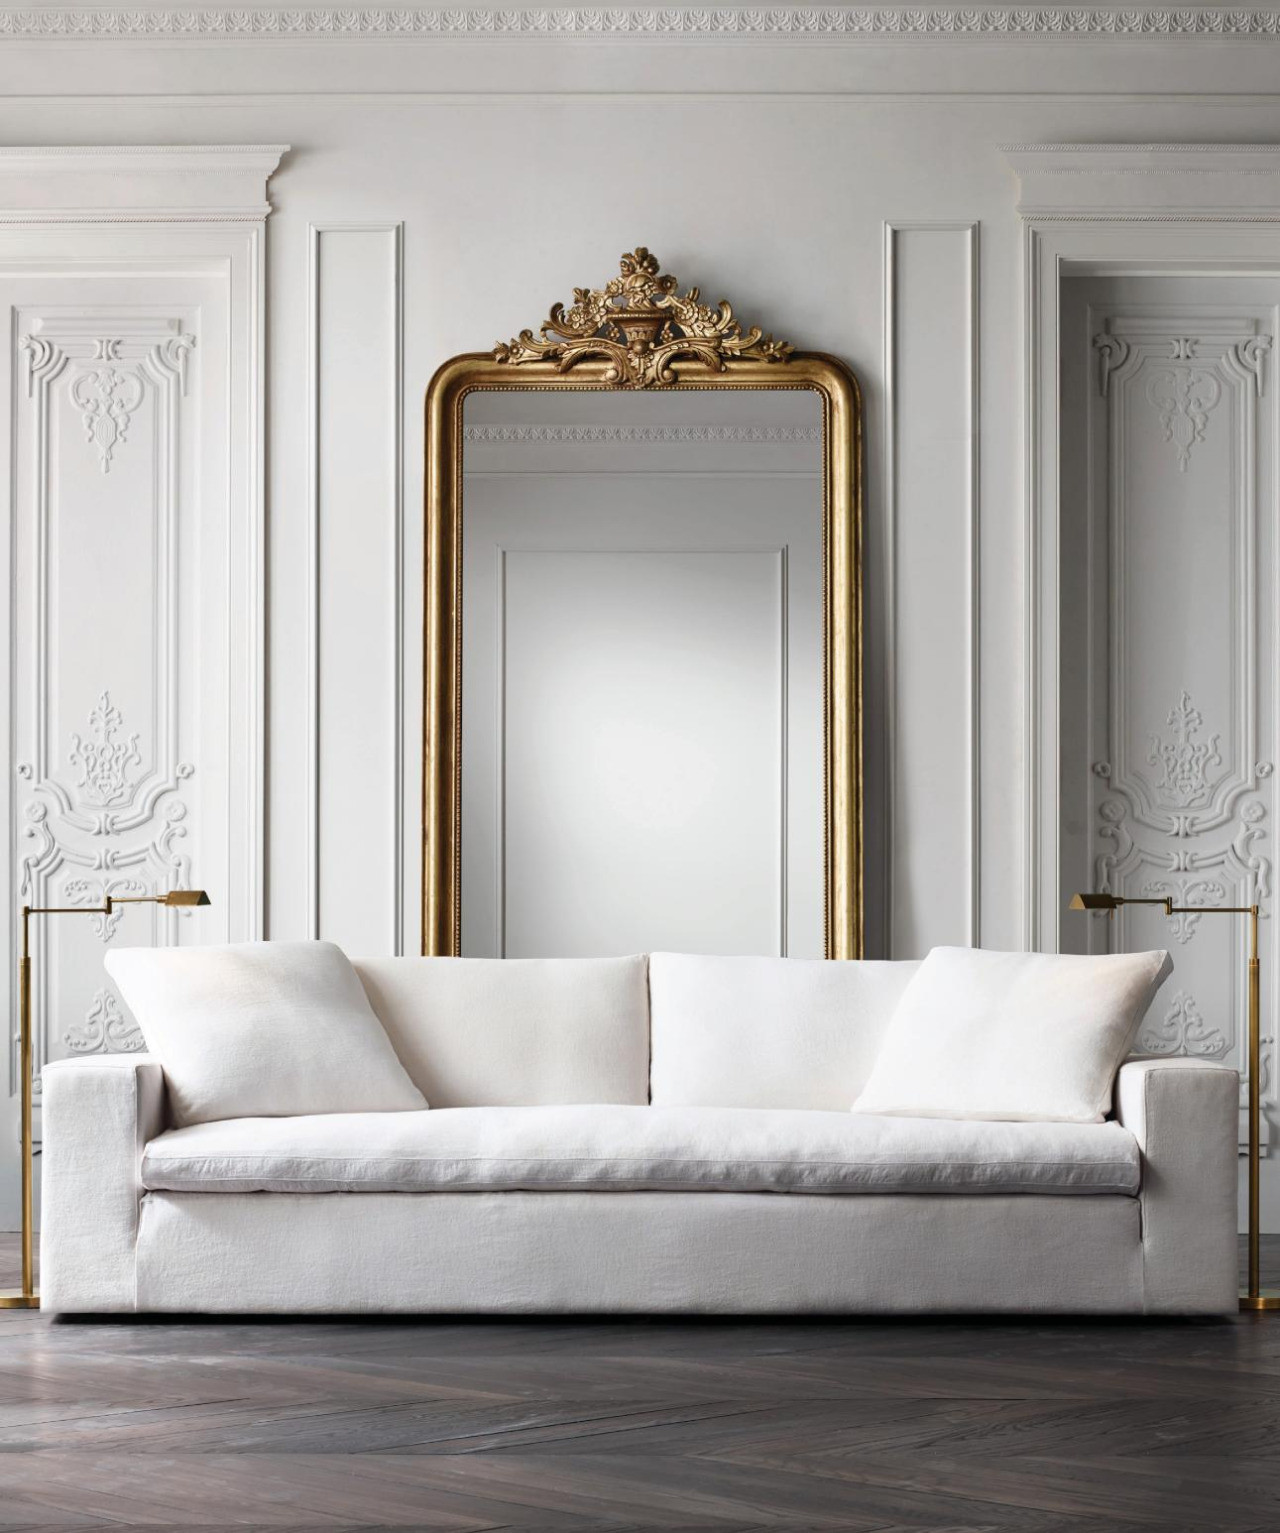 Wall Mirror For Living Room
 Stunning Wall Mirror Designs for your Living Room Decor